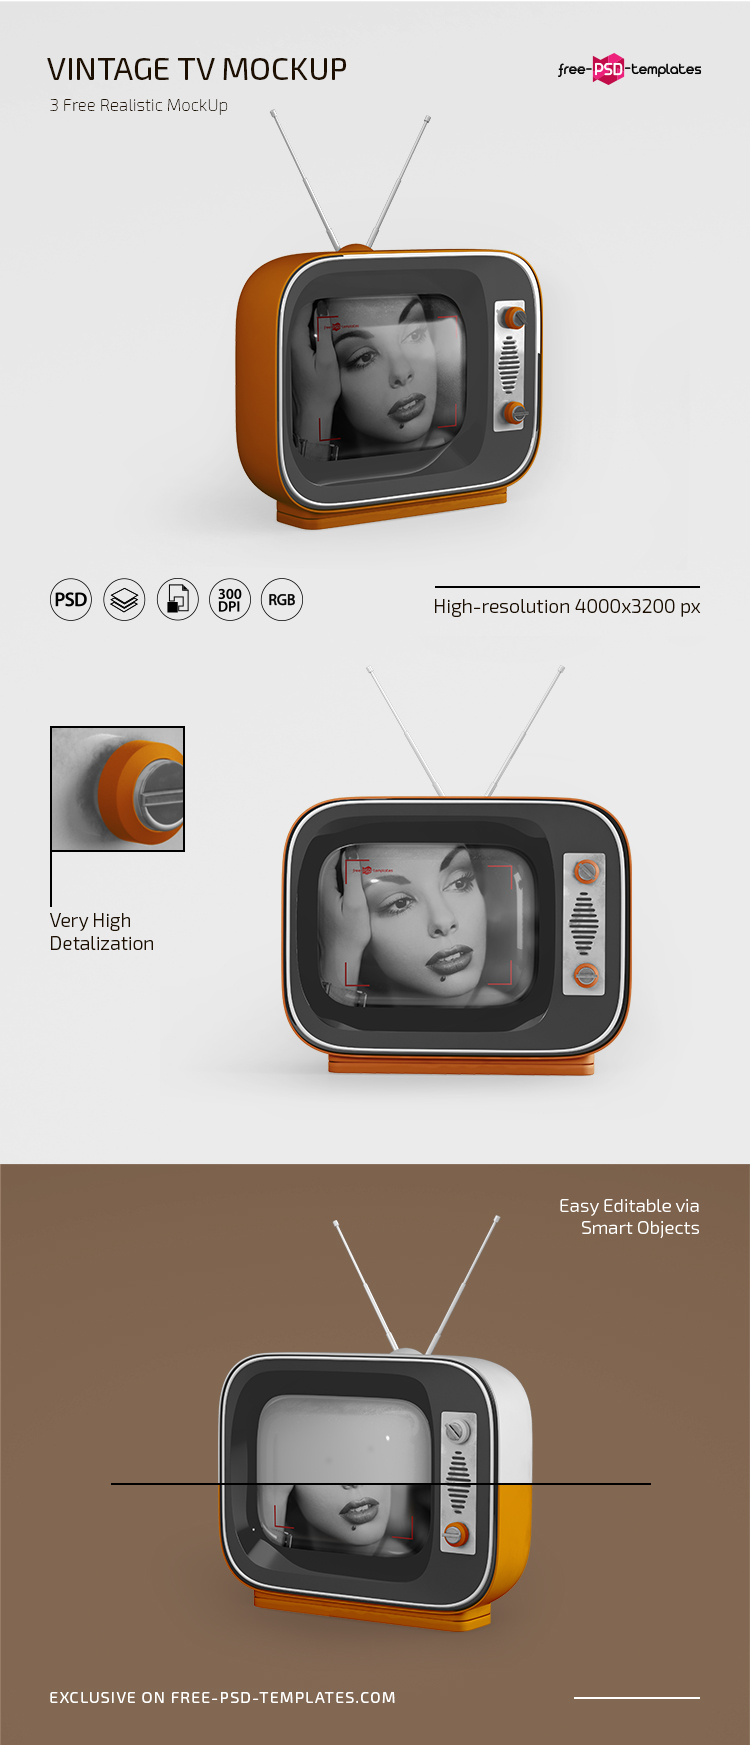 Download Free Vintage TV Mockup in PSD | Free PSD Templates